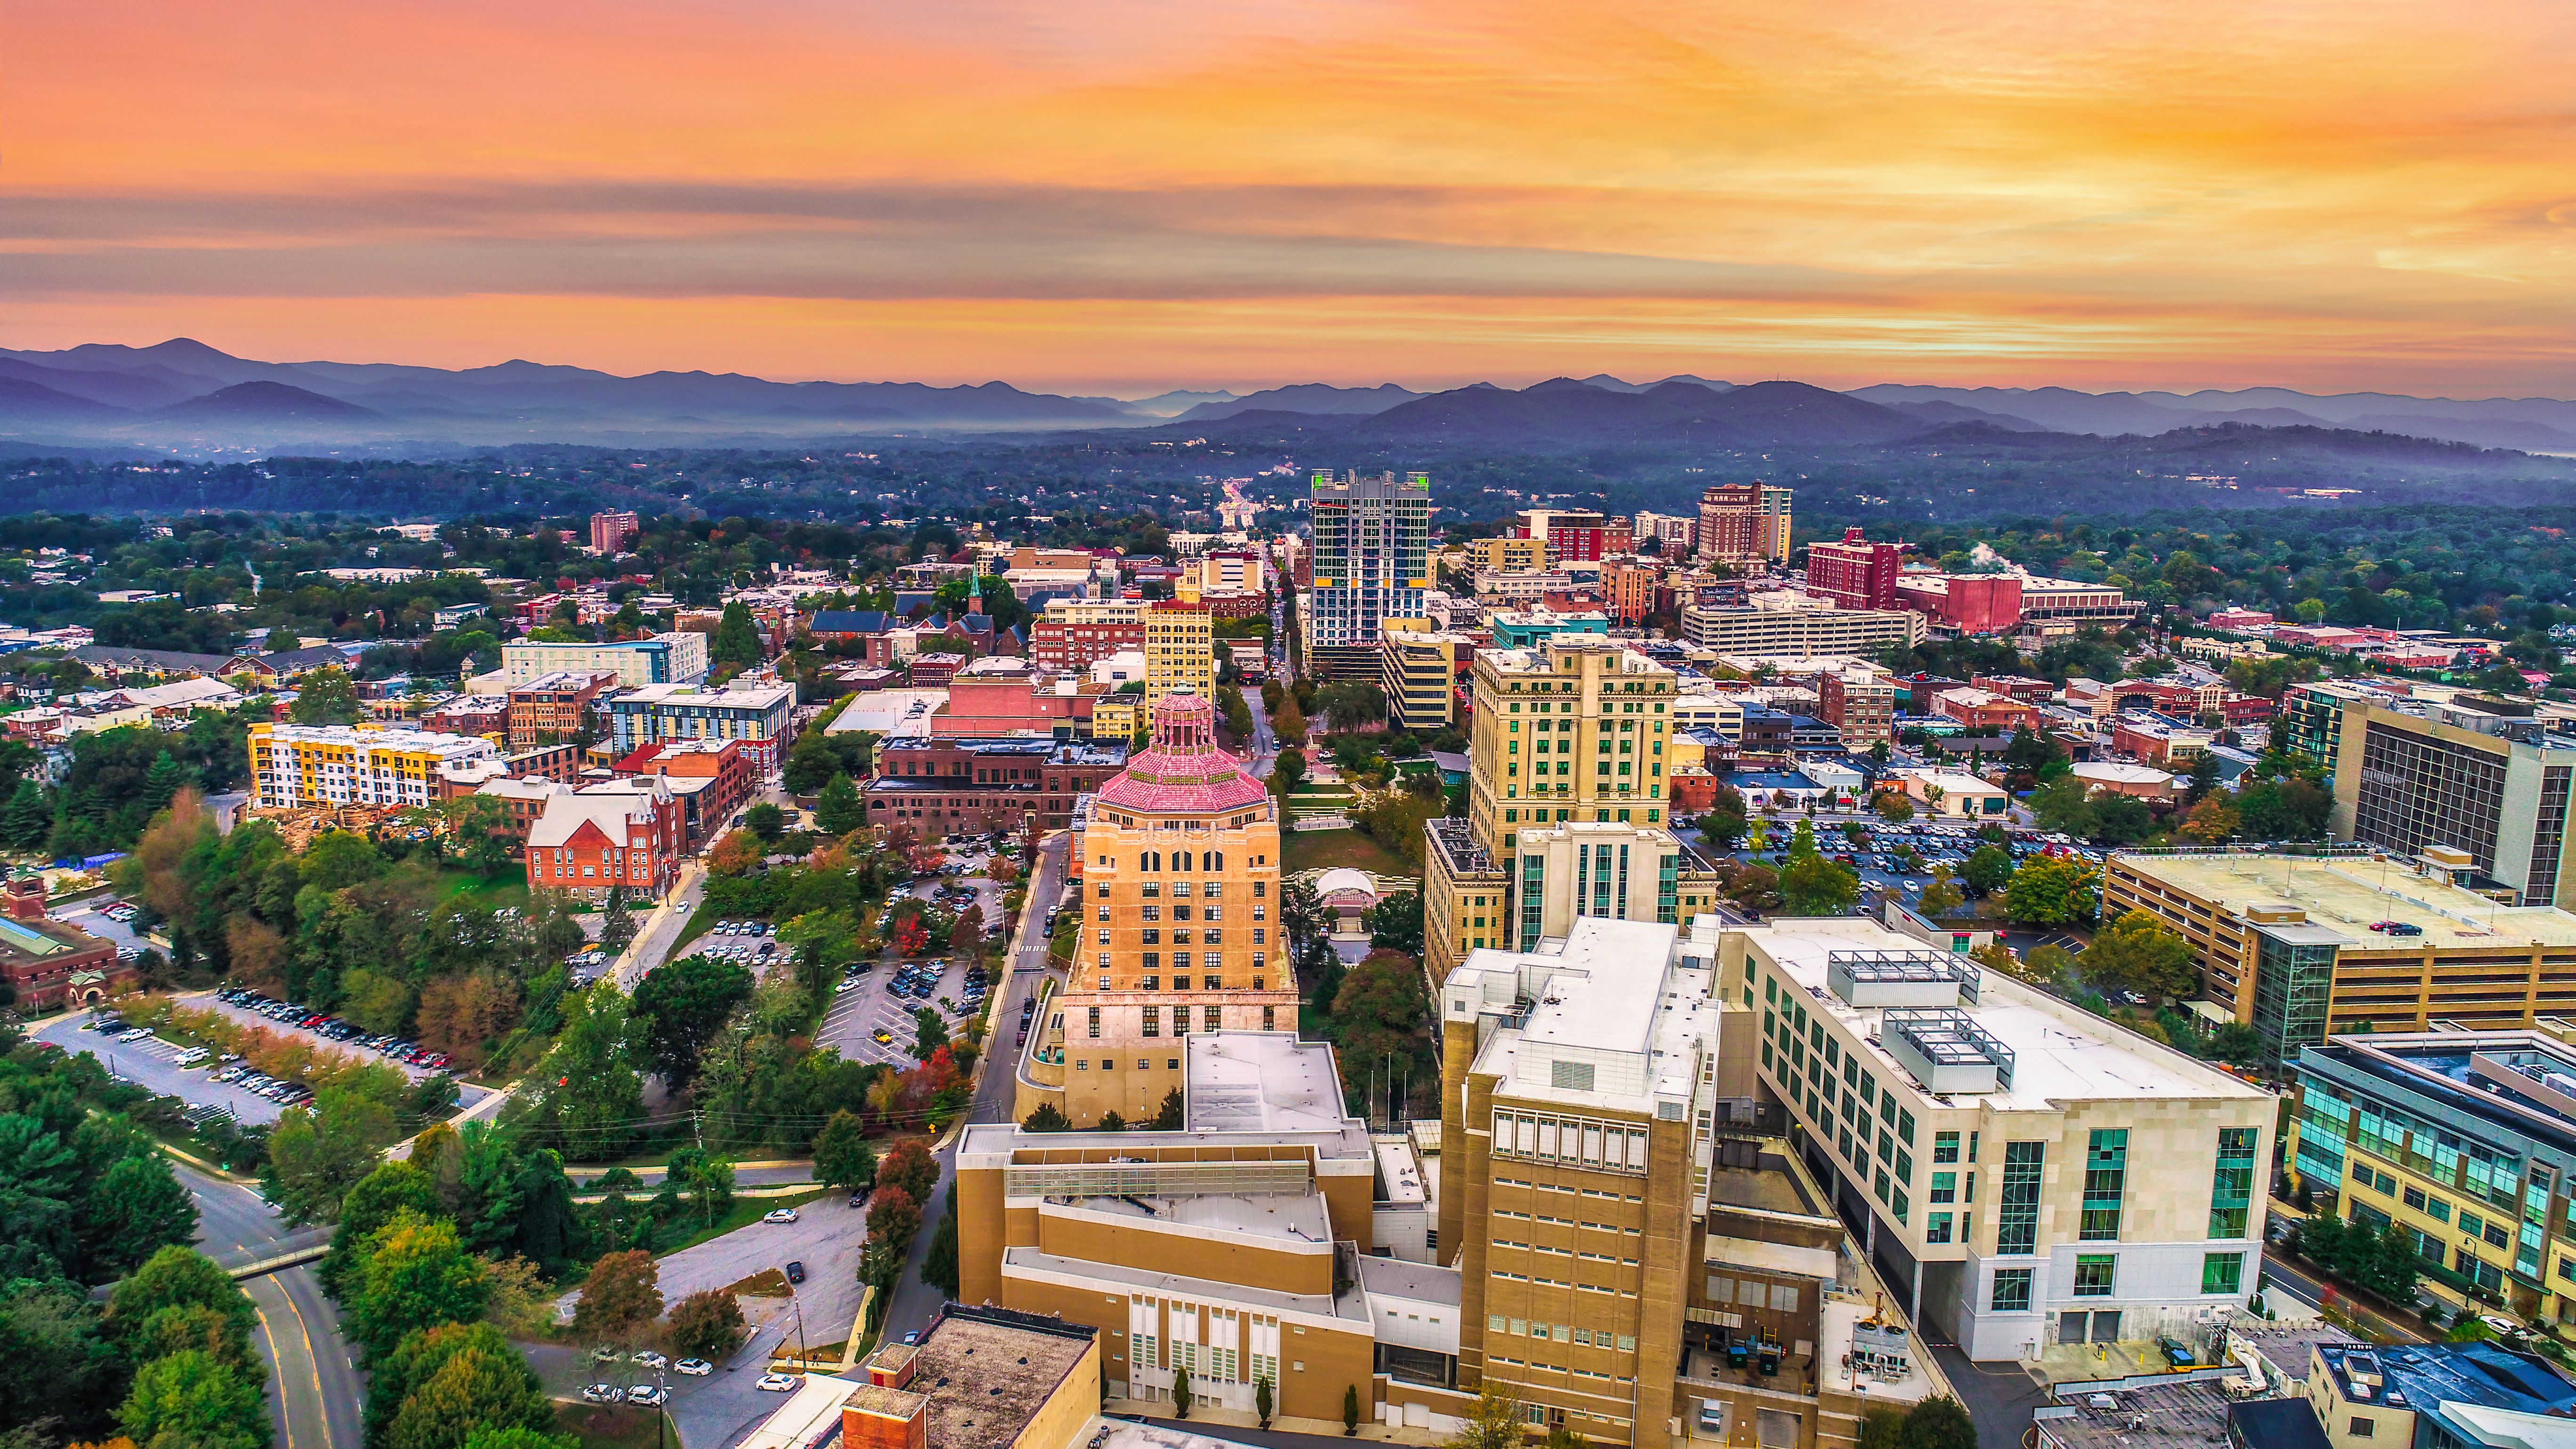 Downtown Asheville with mountain skyline